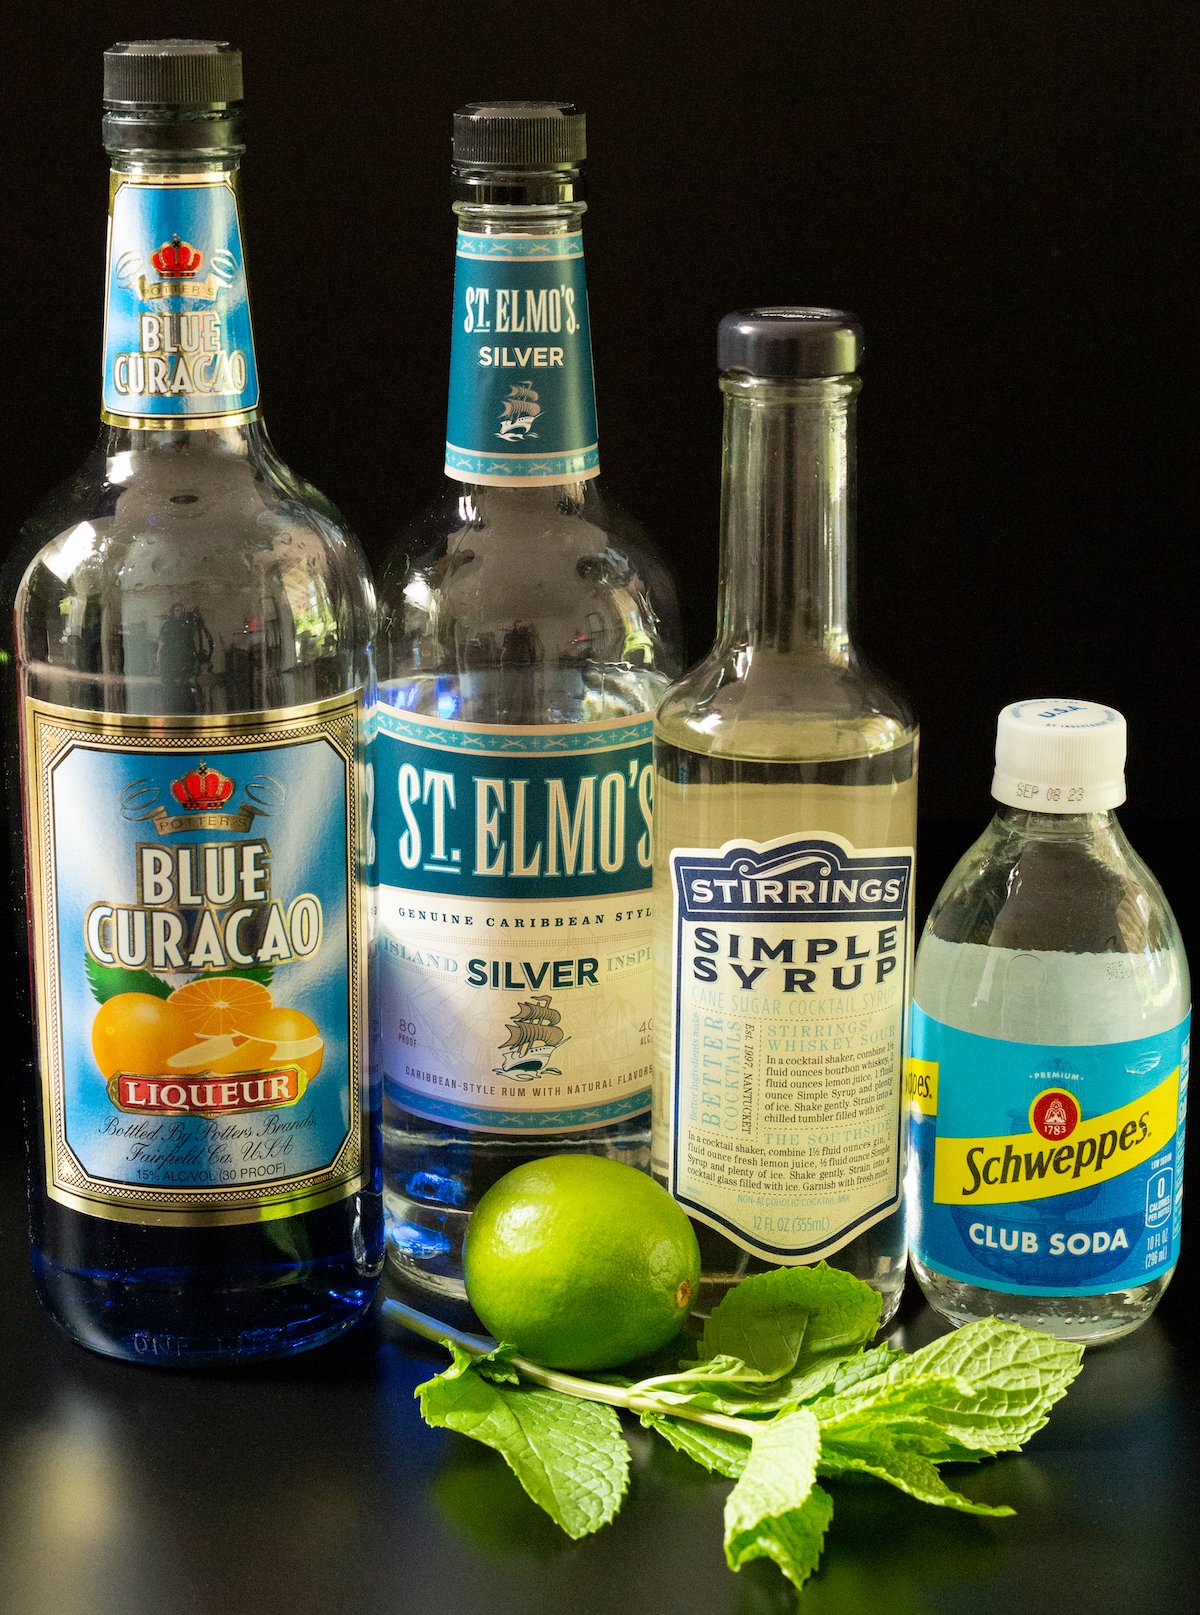 A bottle of blue curacao, white rum, simple syrup, club soda, a lime, and mint leaves on a black background.